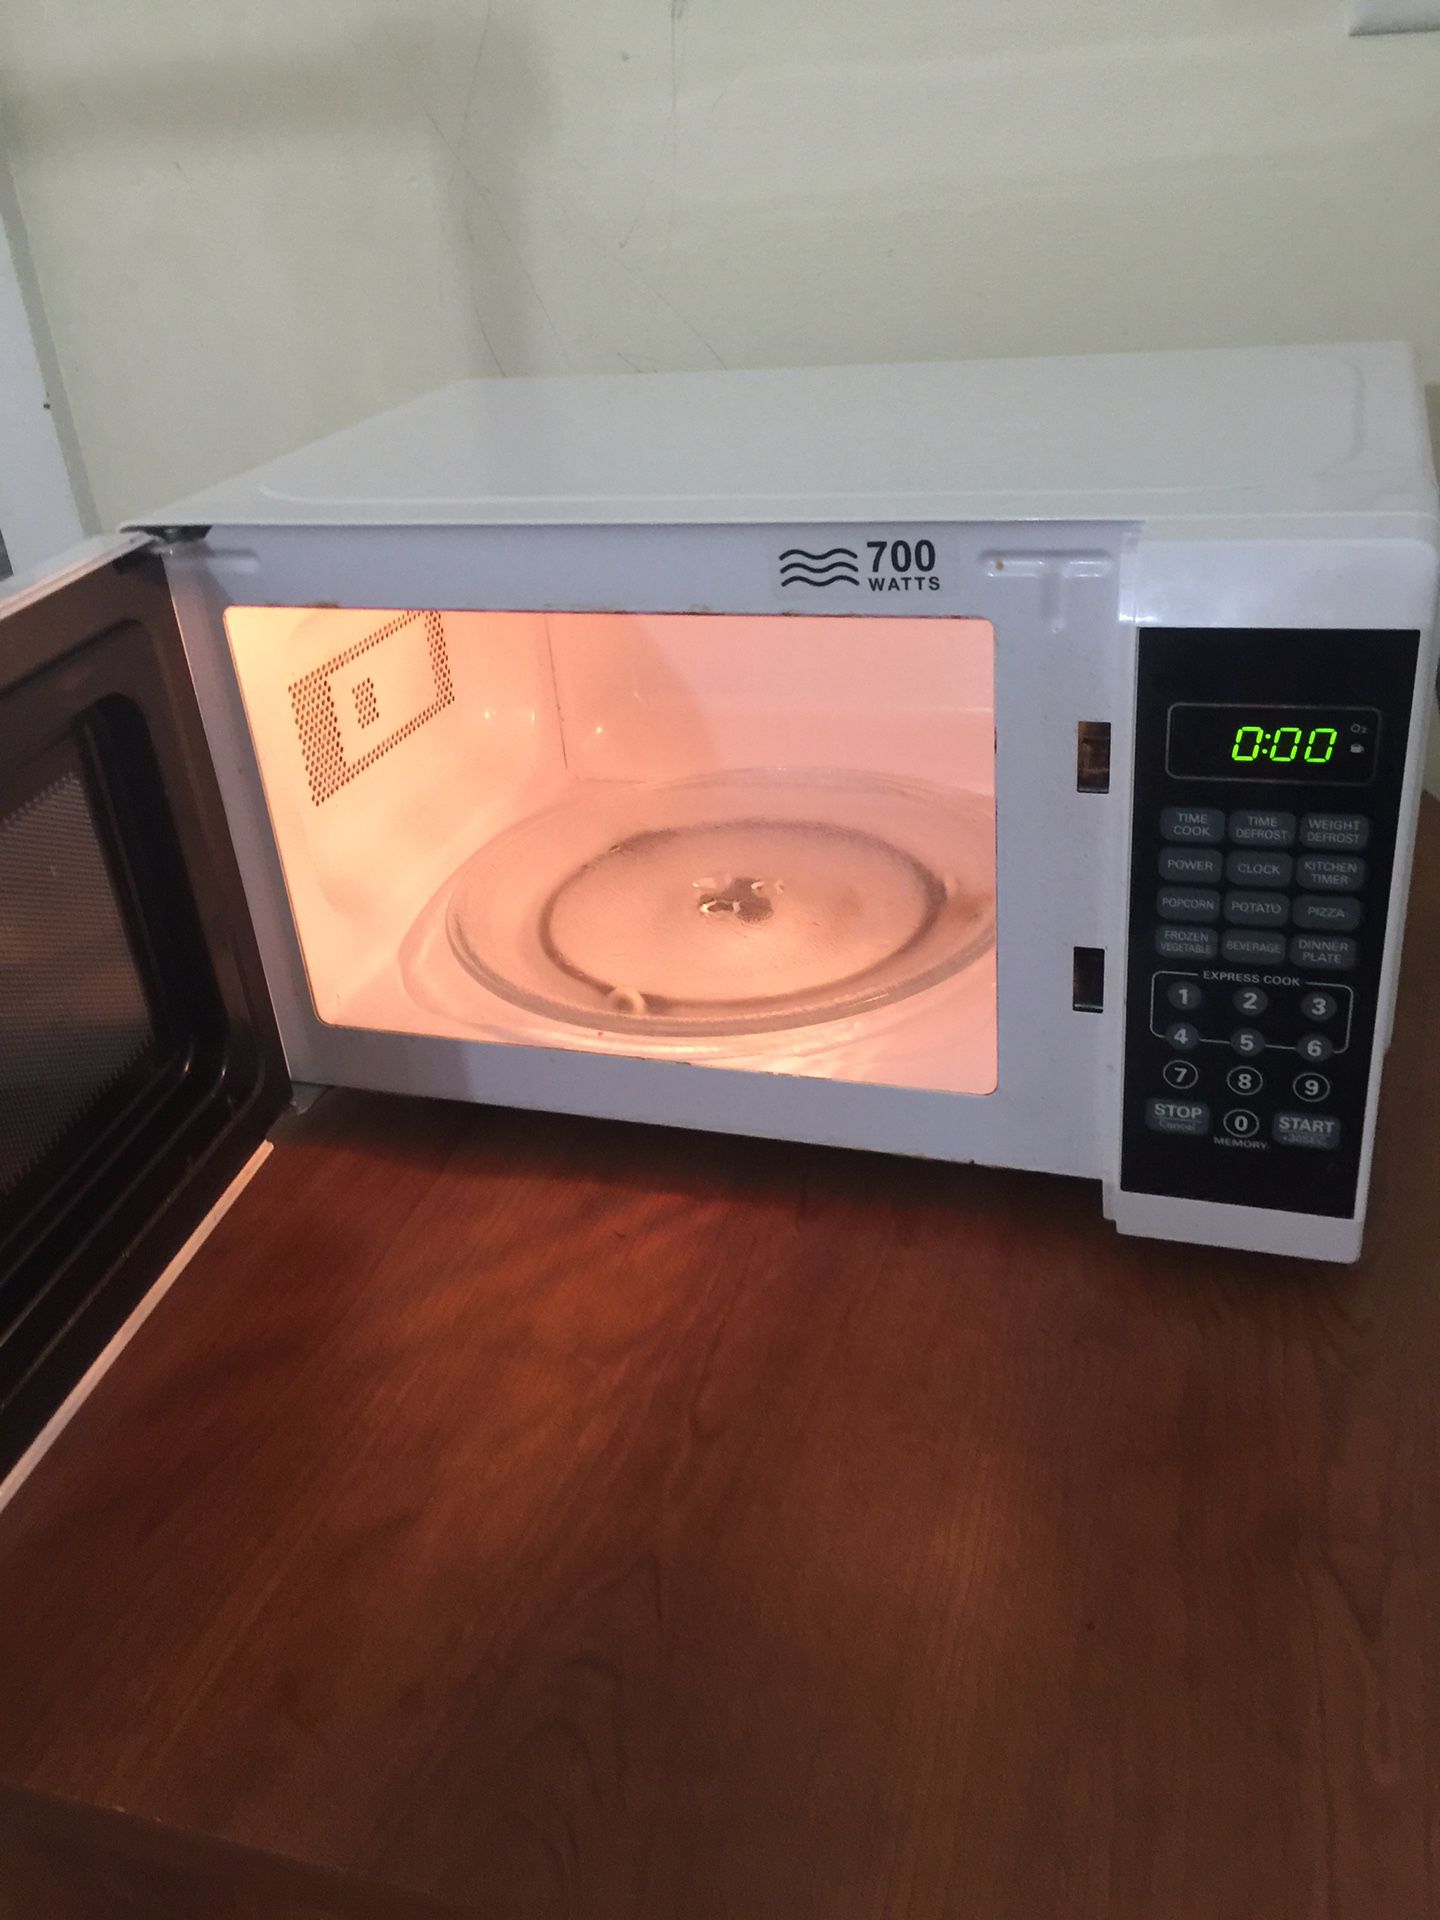 Small microwave